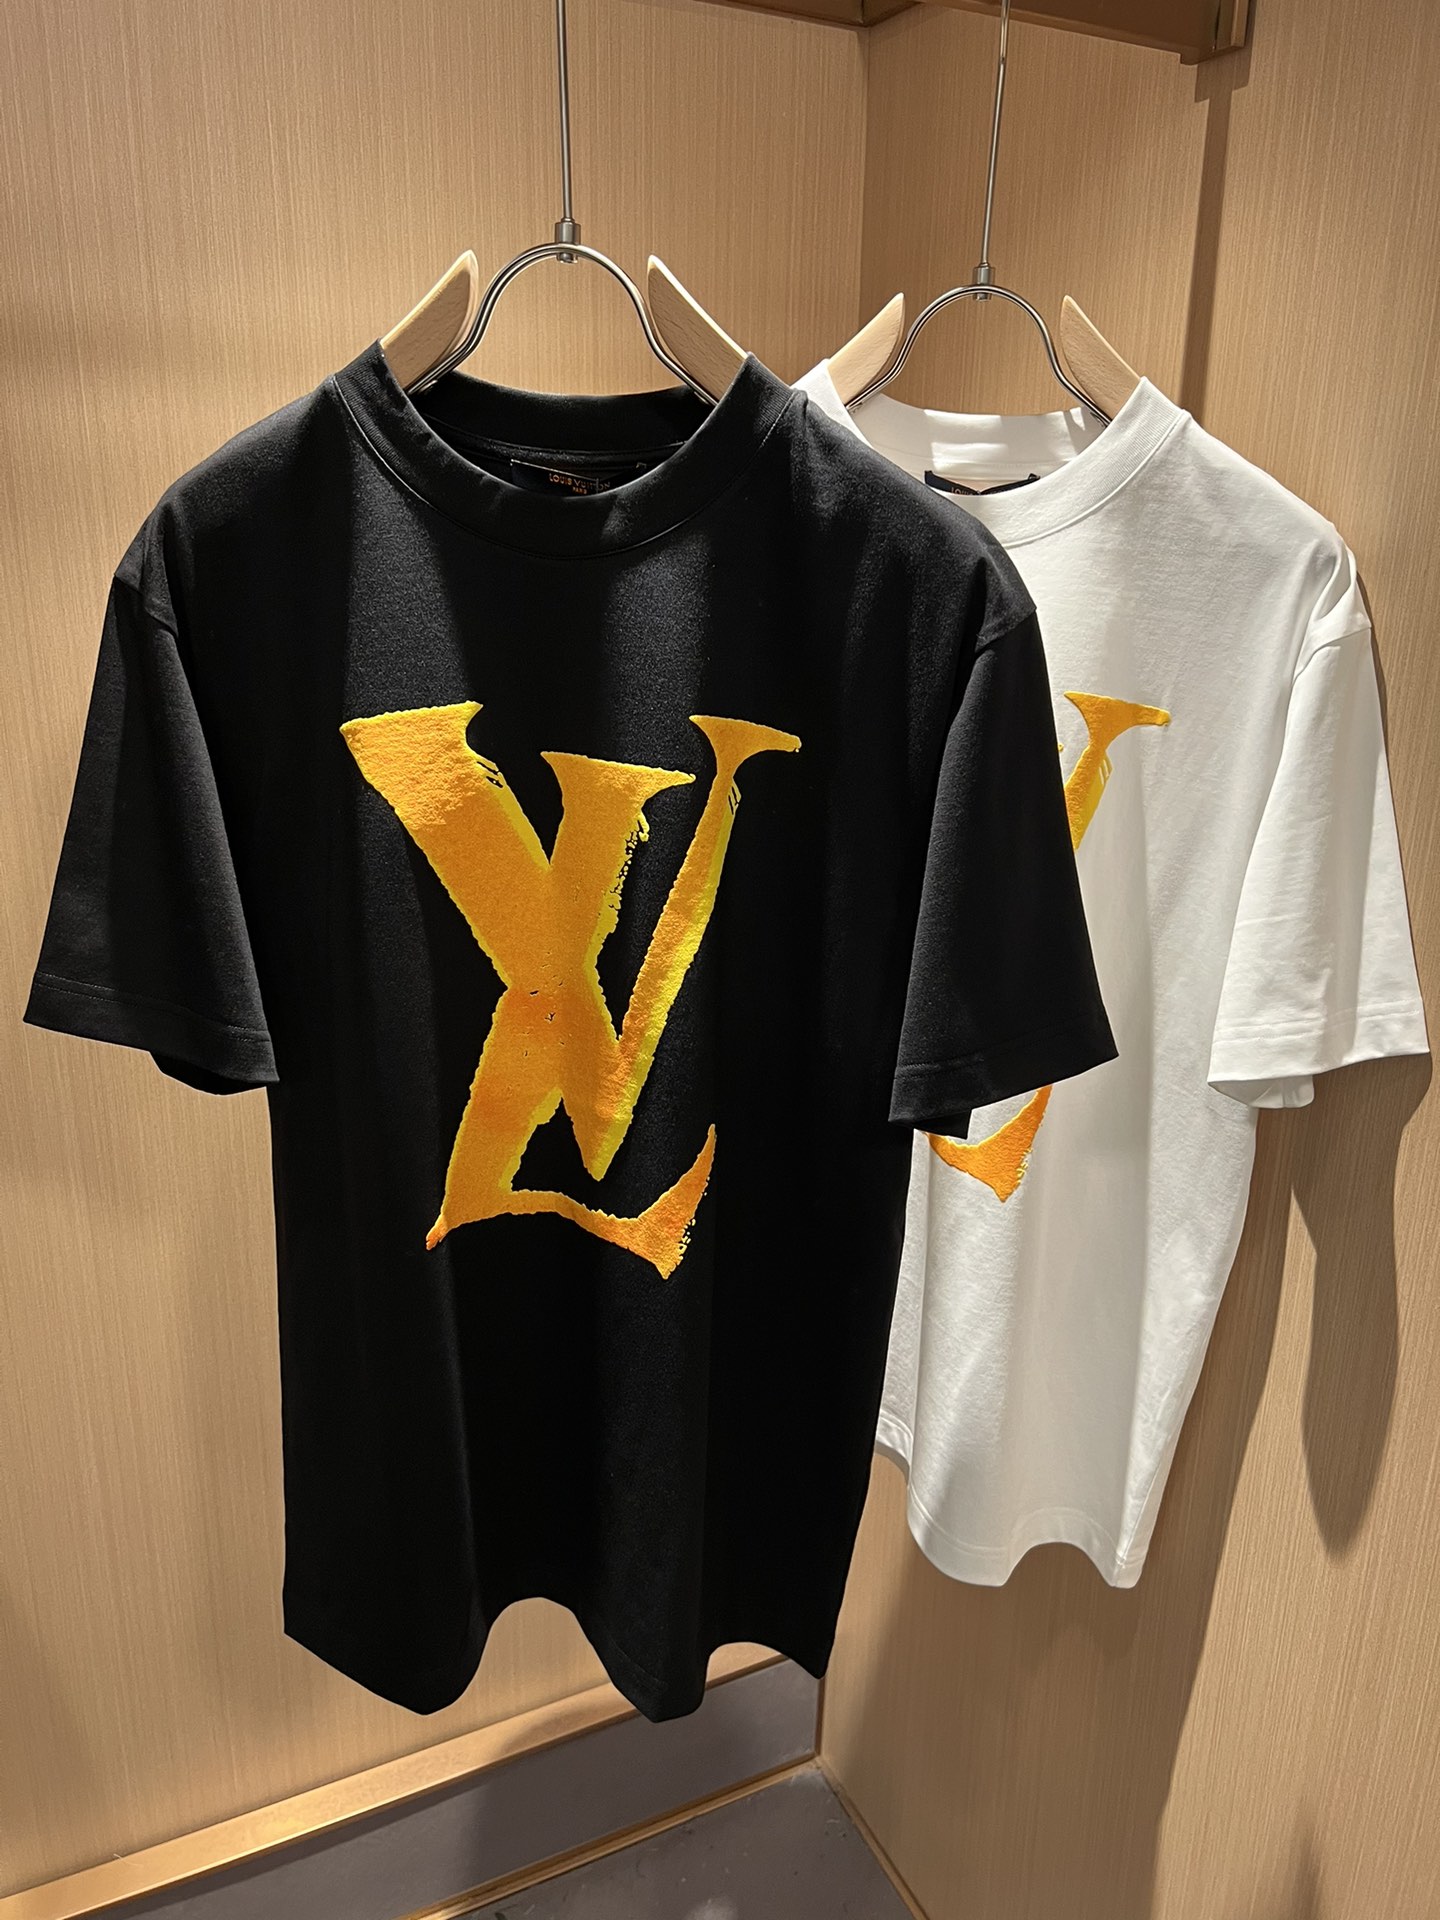 Buy Best High-Quality
 Louis Vuitton Clothing T-Shirt Printing Unisex Cotton Spring/Summer Collection Short Sleeve